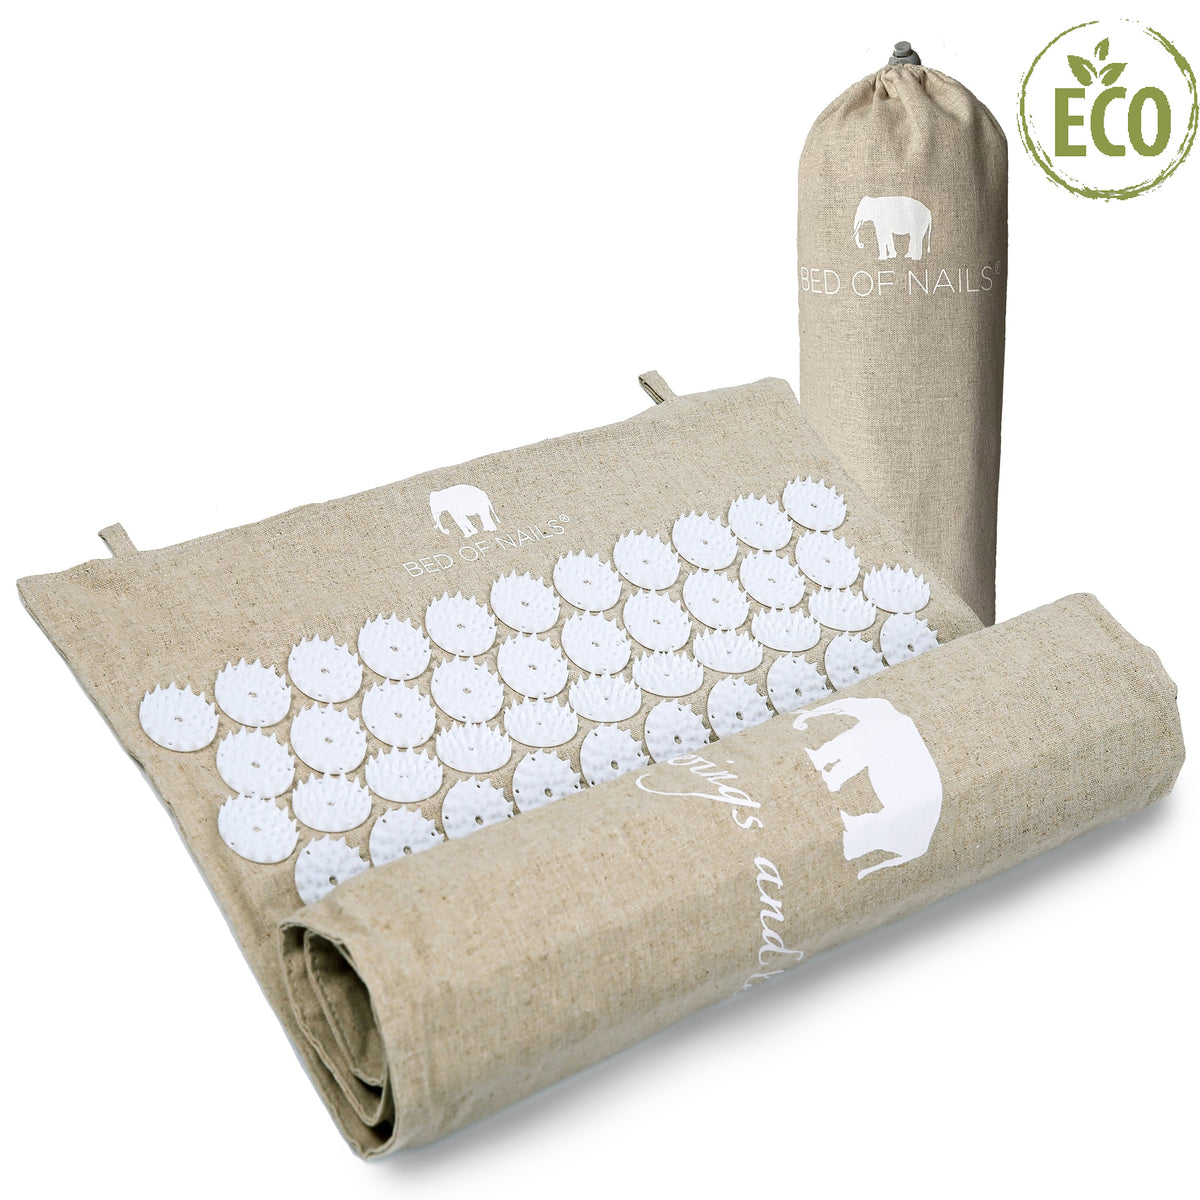 Bed of Nails ECO Travel